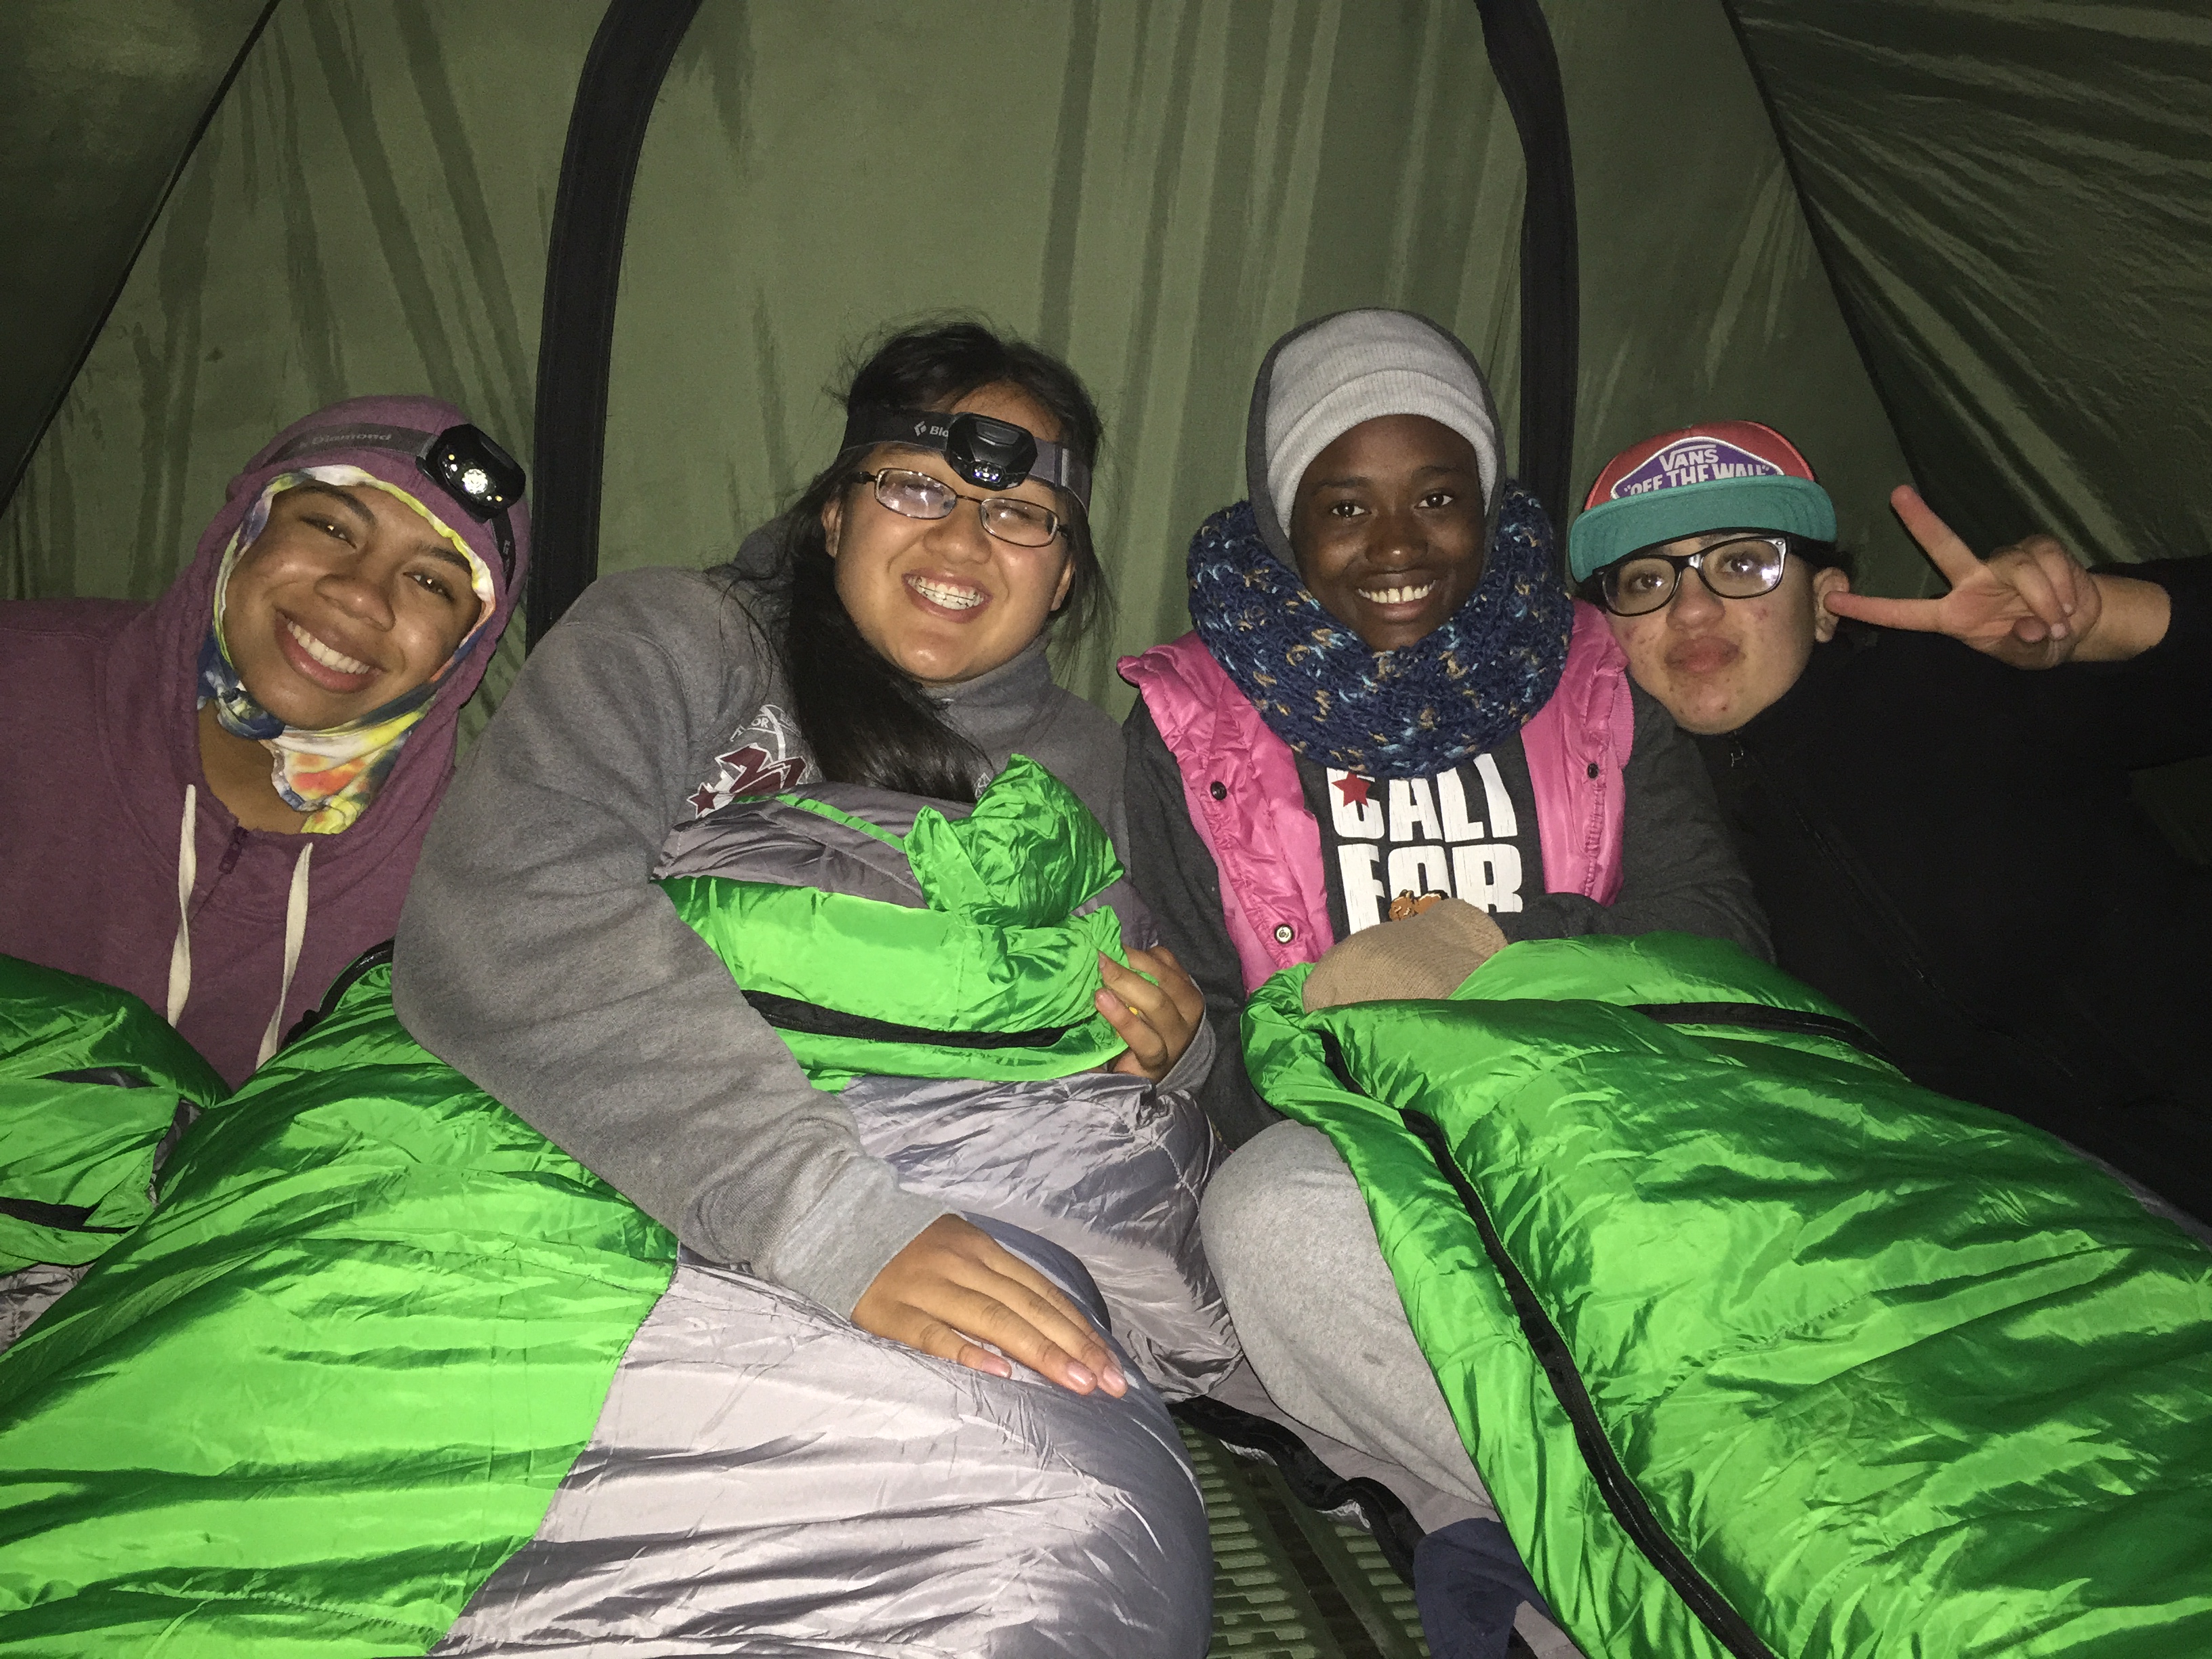 Youth intership camping trip at Point Reyes, CA. From left to right: Lurleen Frazier, Sarah Hoang, Olive Tambou, Stela Zouradakis